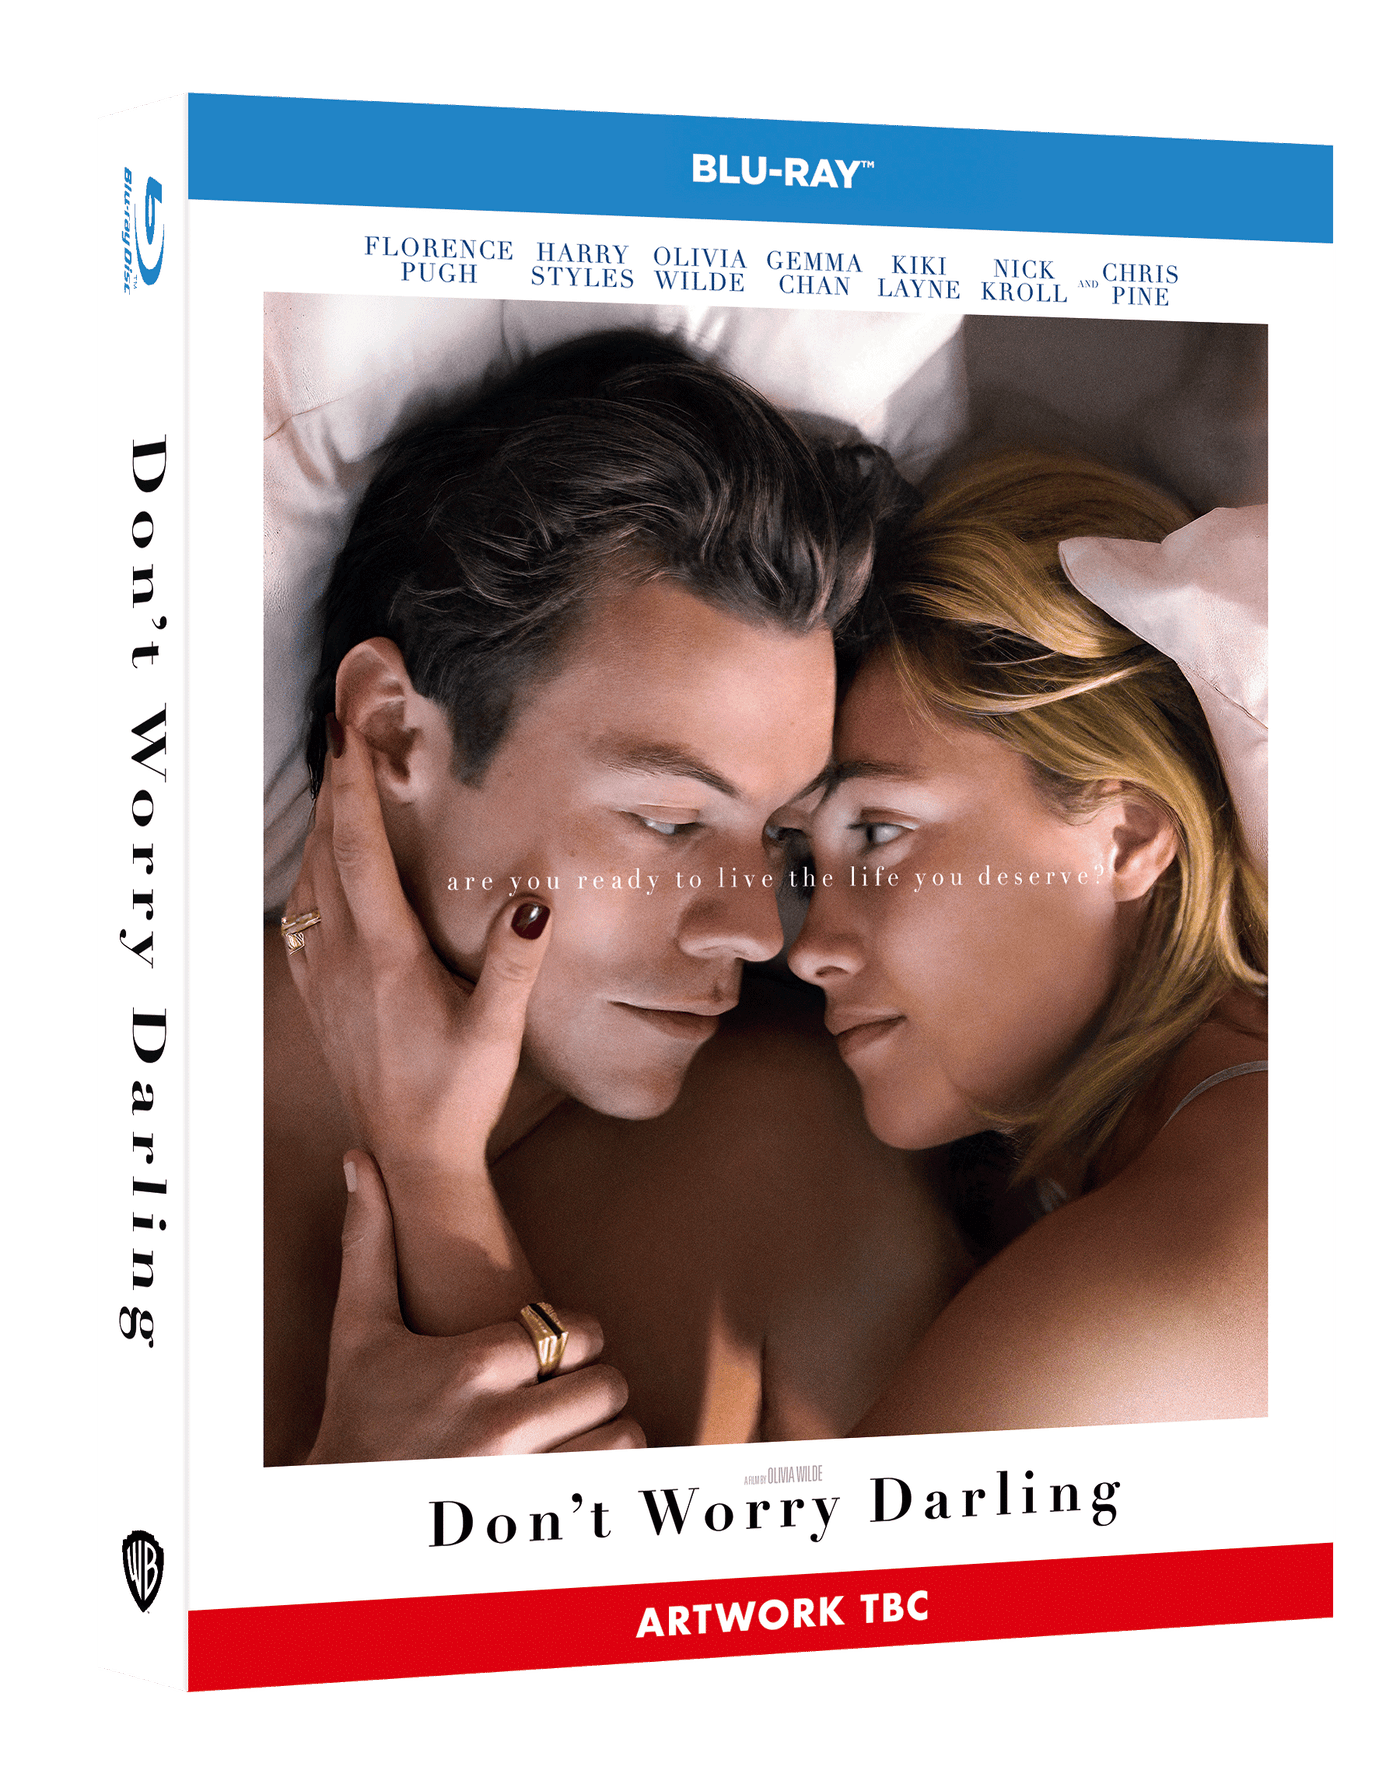 Don't Worry Darling (Blu-ray) (2022)